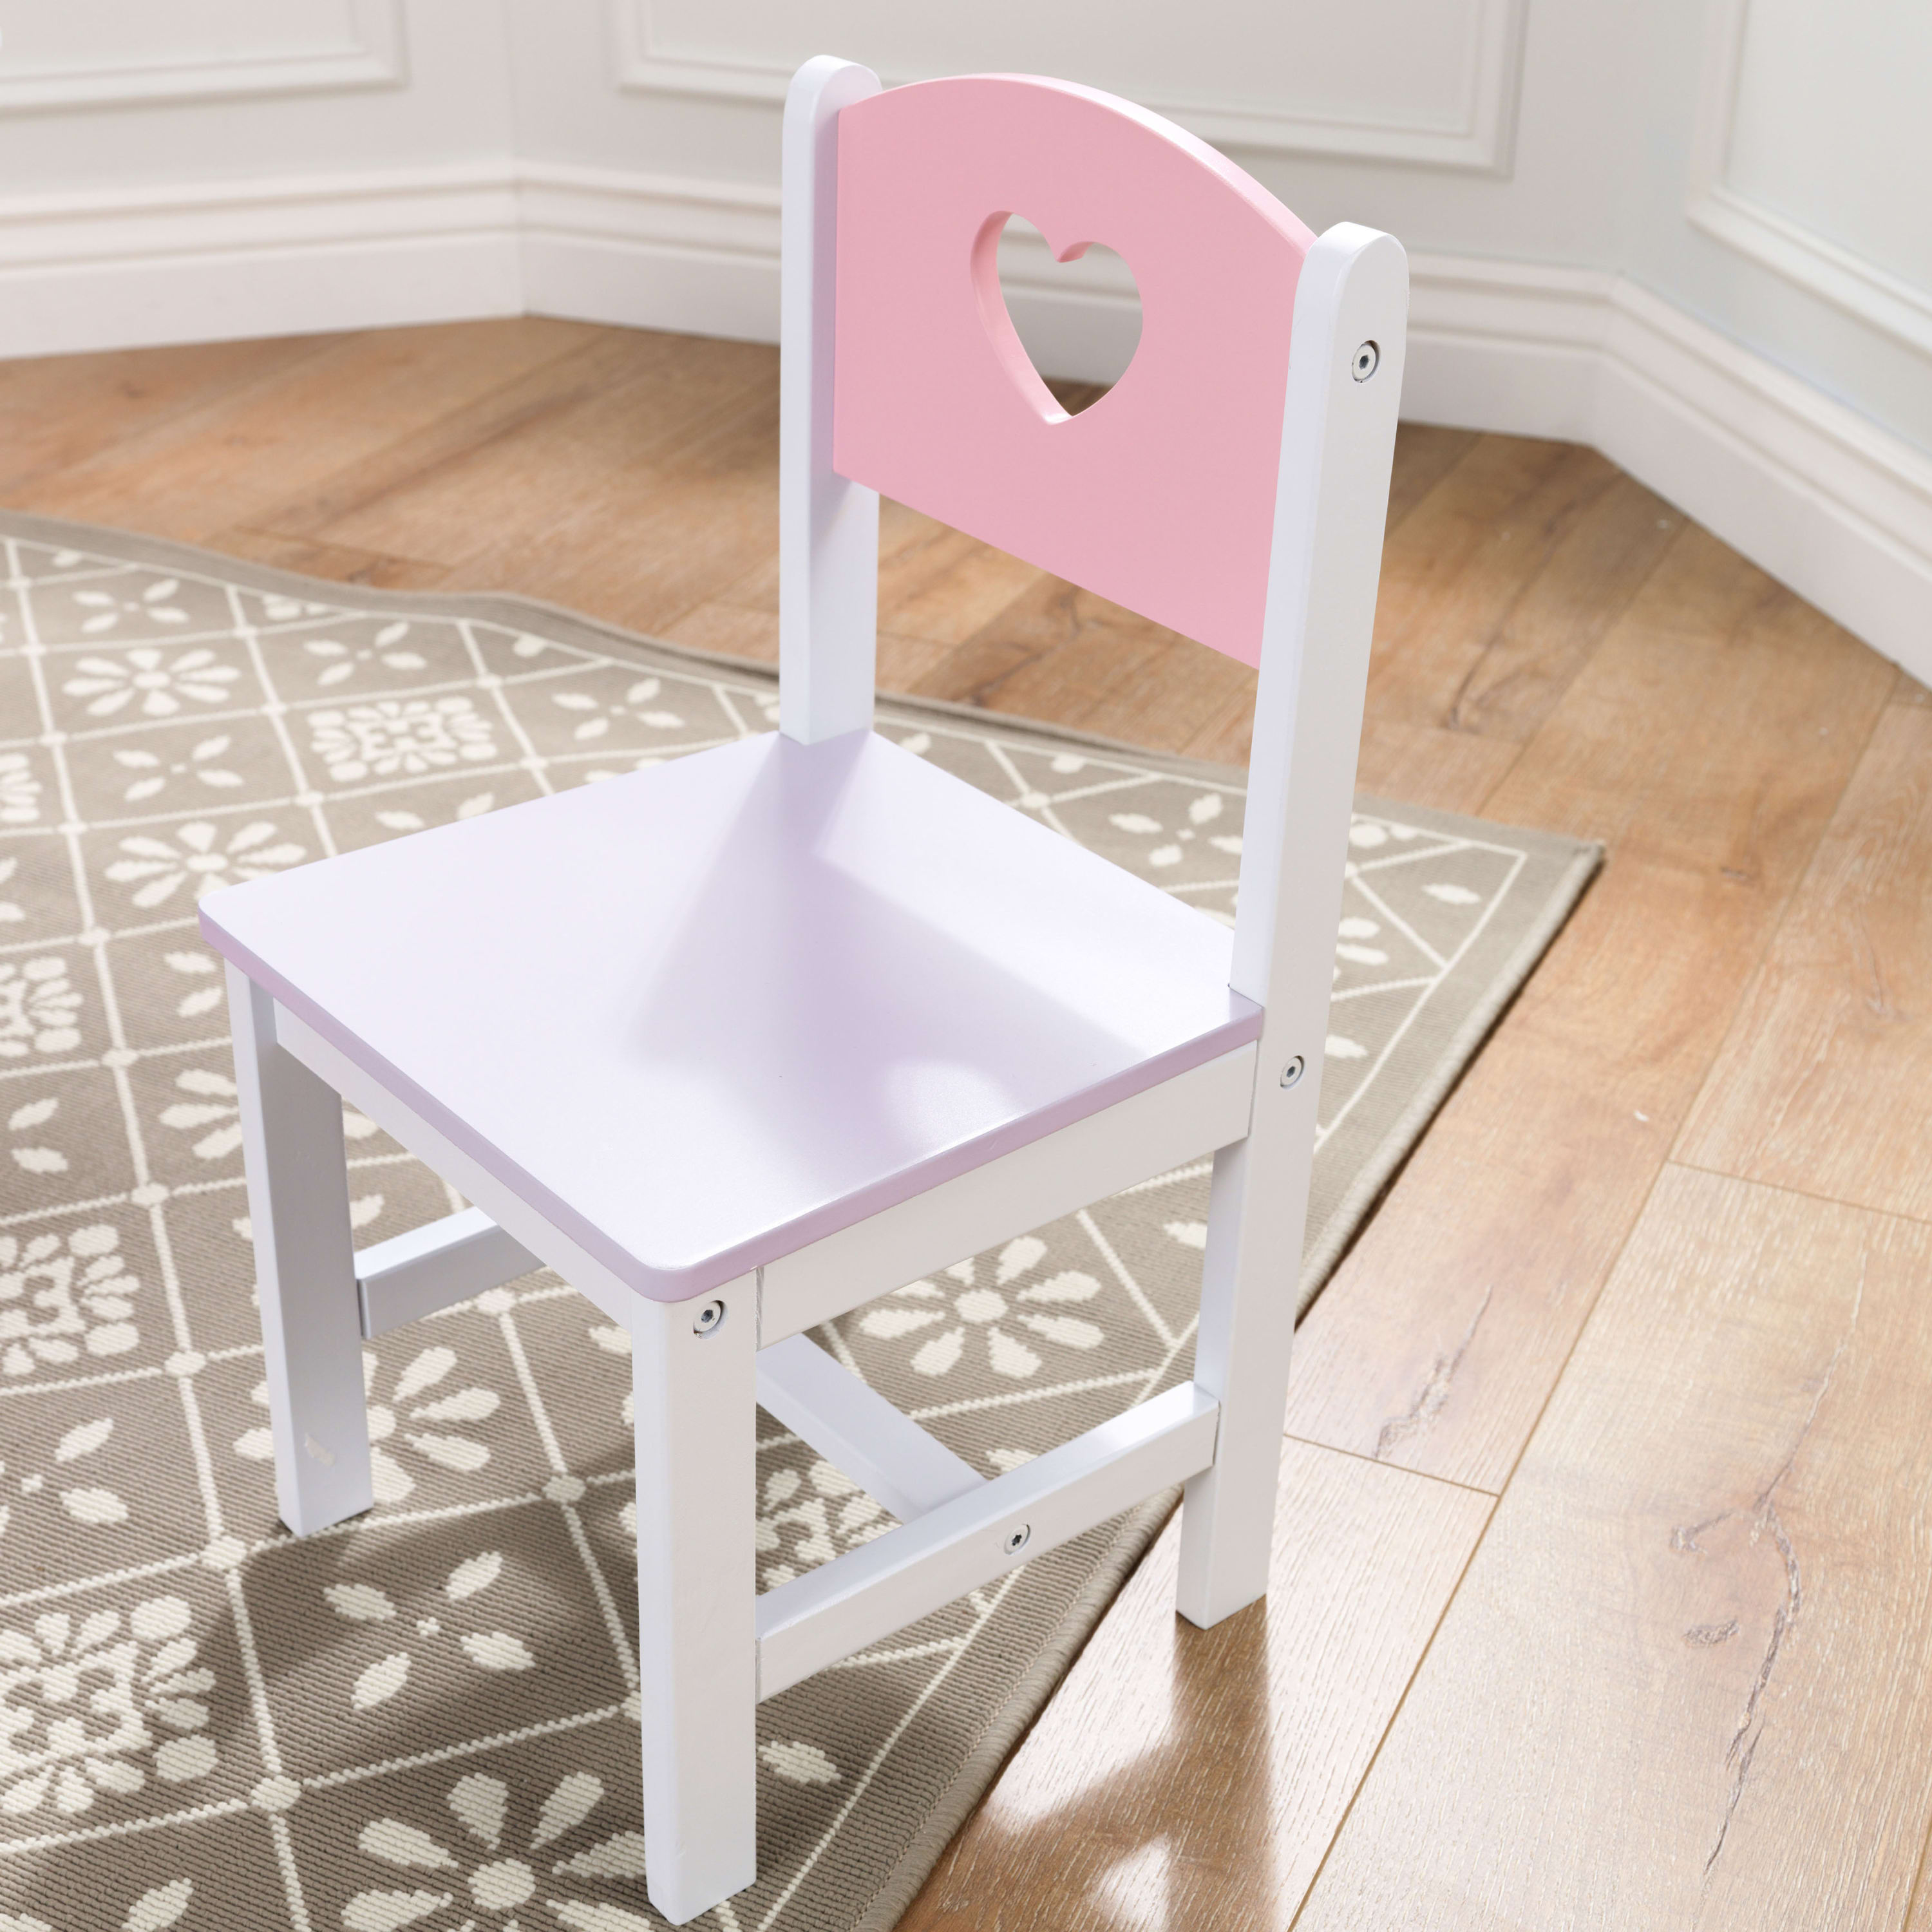 KidKraft Wooden Heart Table & Chair Set with 4 Bins, Pink, Purple & White, for Ages 3+ - image 5 of 7